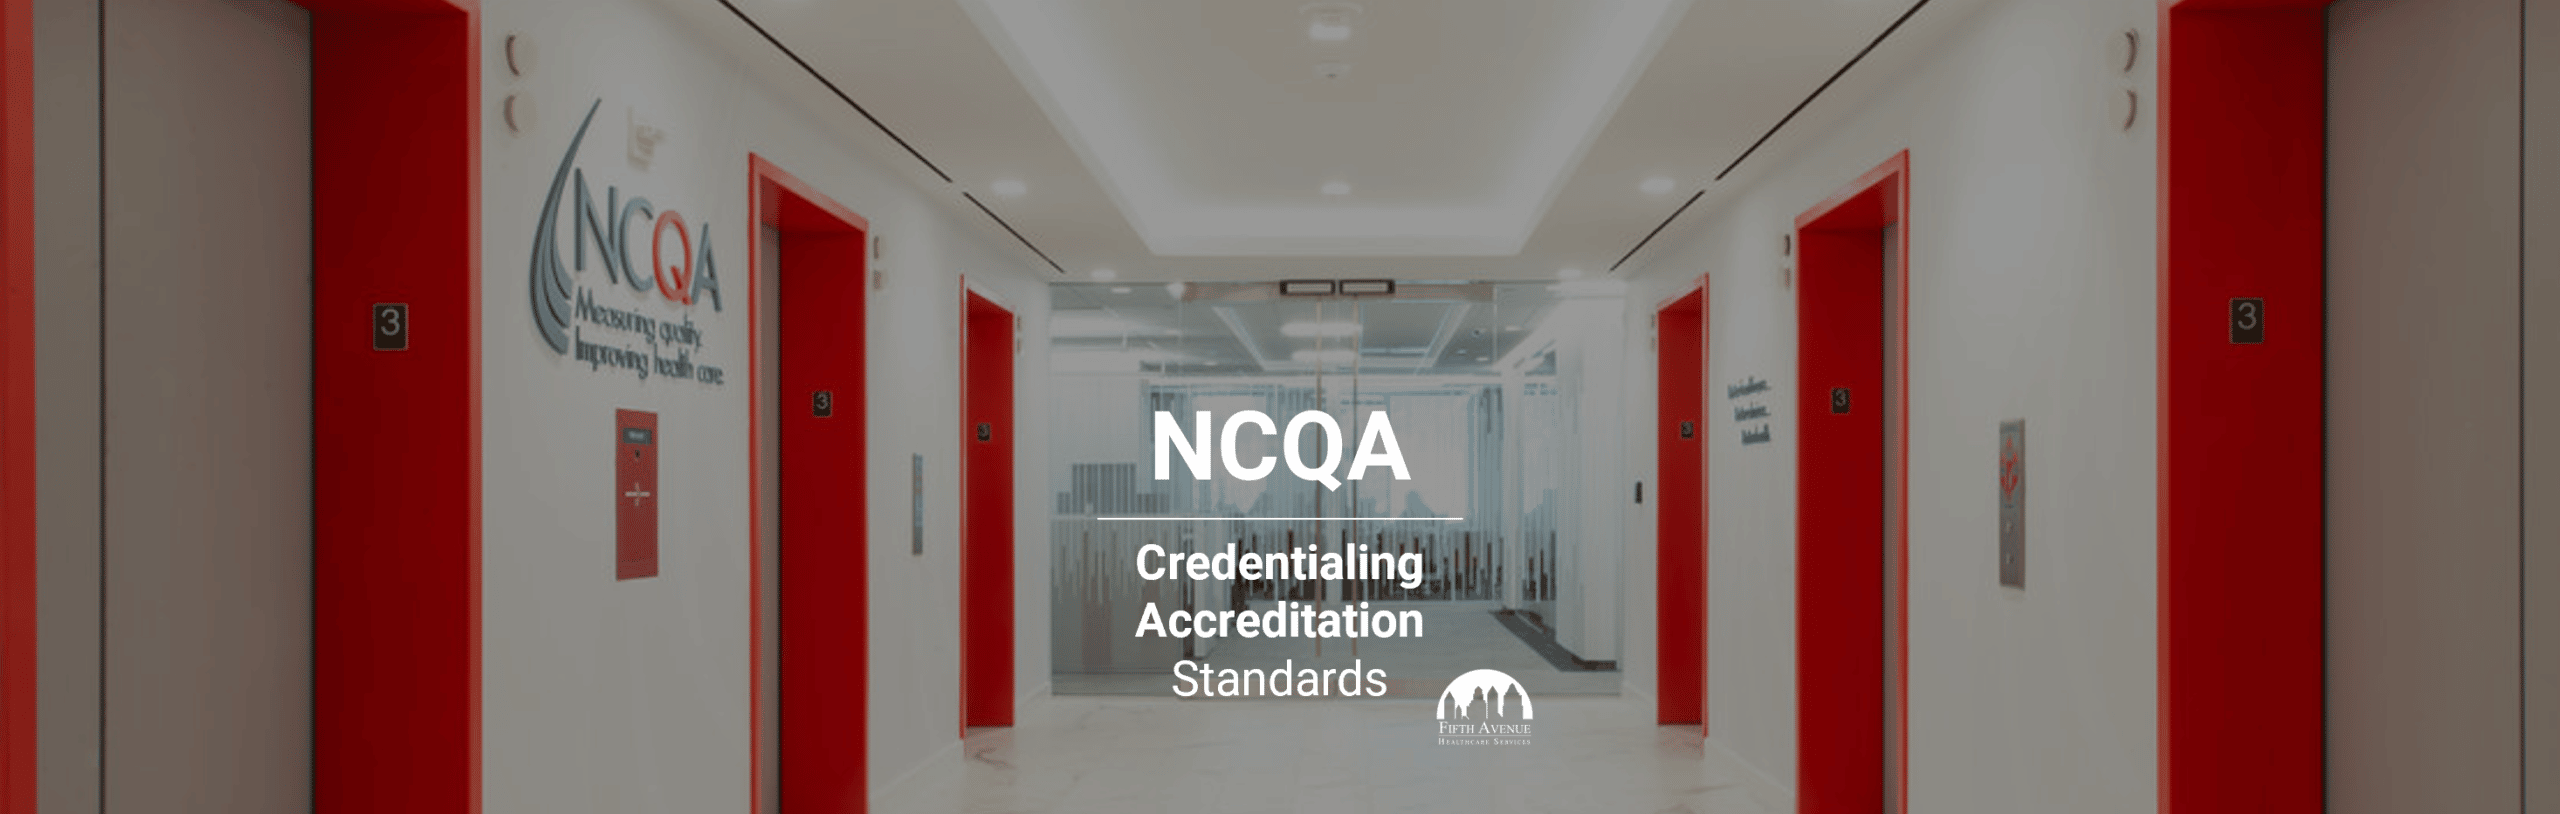 NCQA Credentialing Accreditation Standards Fifth Avenue Healthcare